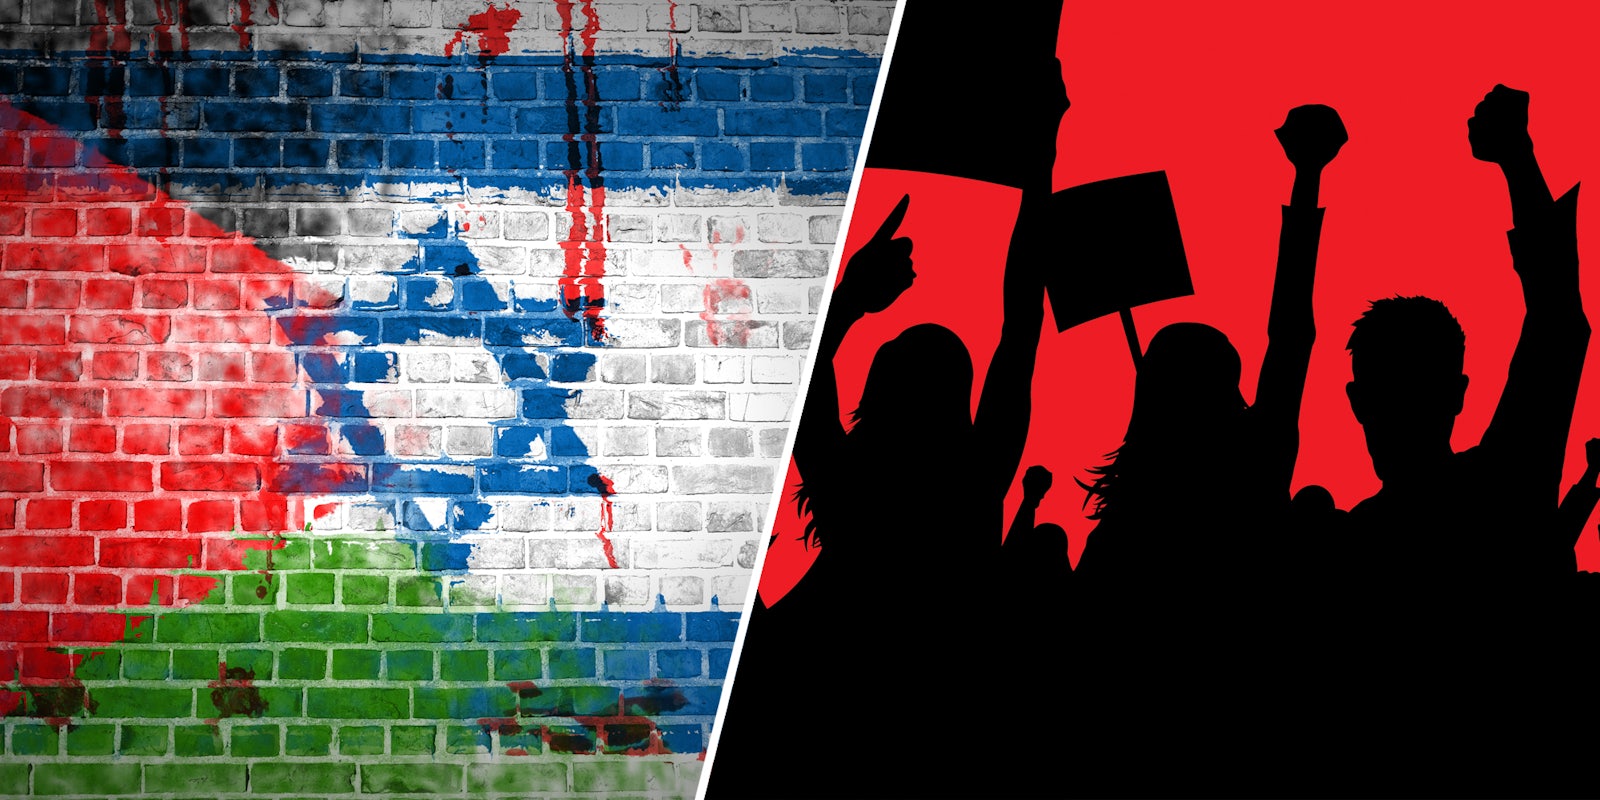 Israeli and palestian flags on bricks(l), Graphic of protesters(r)